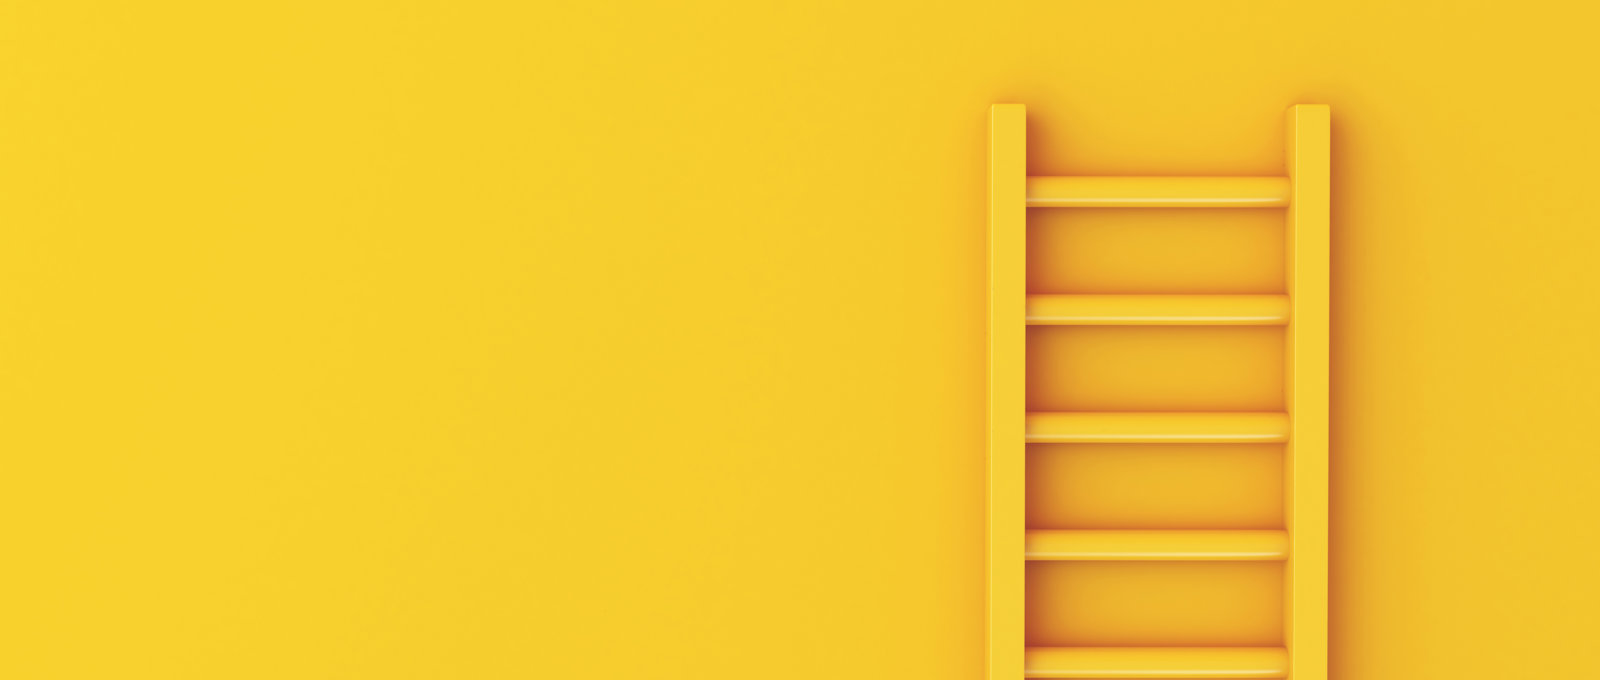 Photo of a yellow ladder leaning against a yellow wall